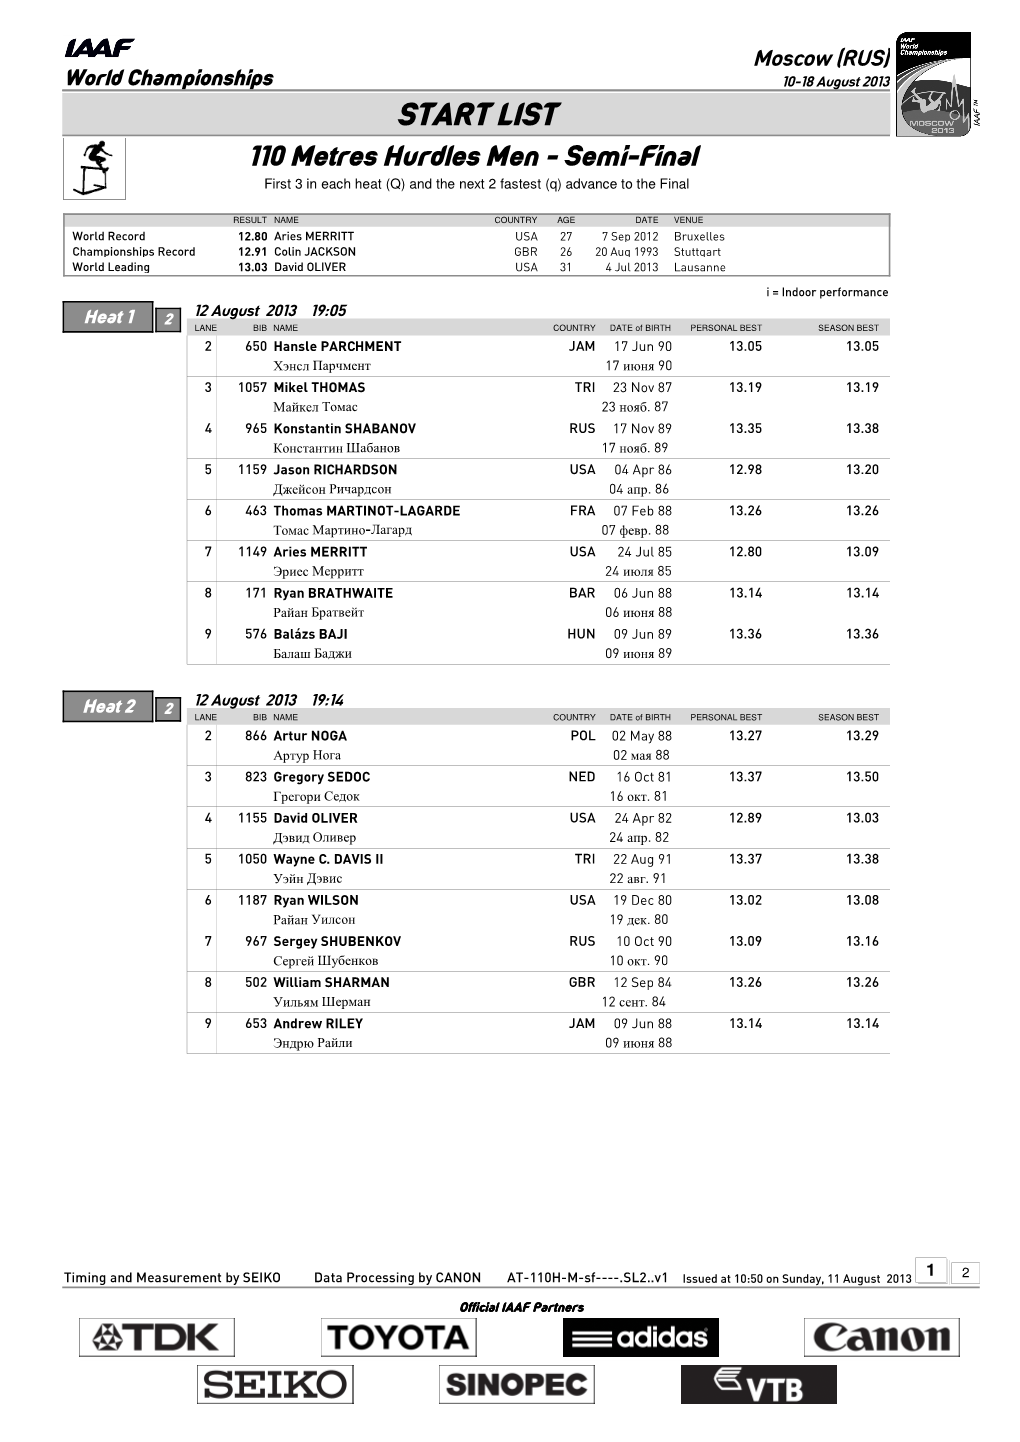 START LIST 110 Metres Hurdles Men - Semi-Final First 3 in Each Heat (Q) and the Next 2 Fastest (Q) Advance to the Final